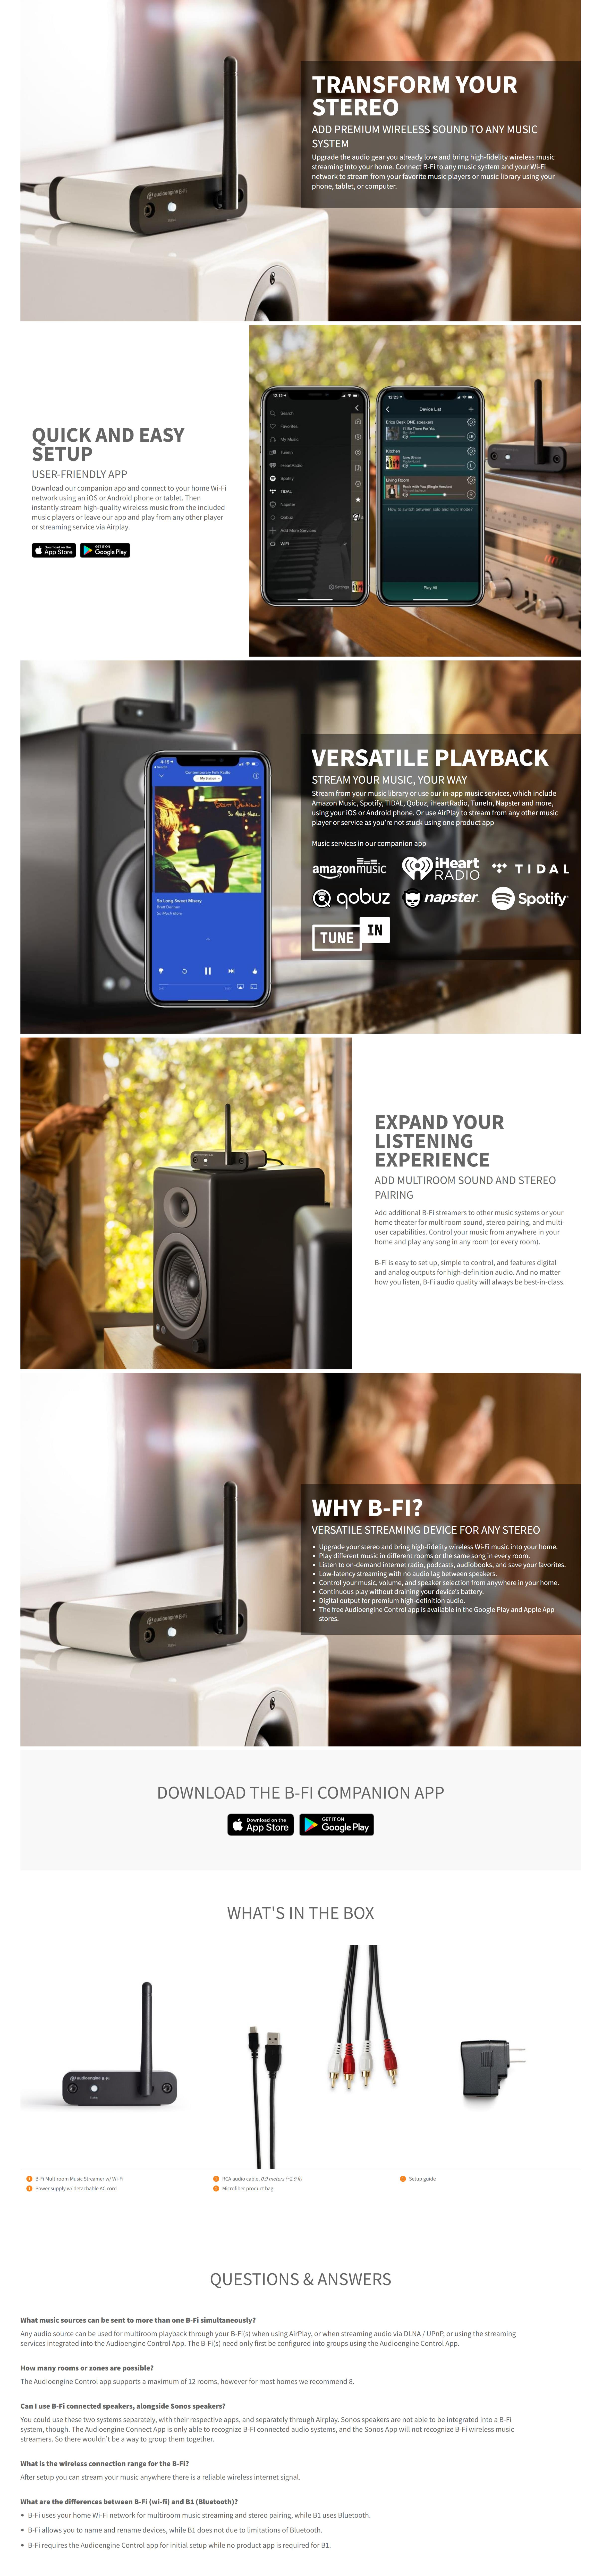 A large marketing image providing additional information about the product Audioengine B-Fi Mulitroom Music Streamer w/ Wi-Fi - Additional alt info not provided